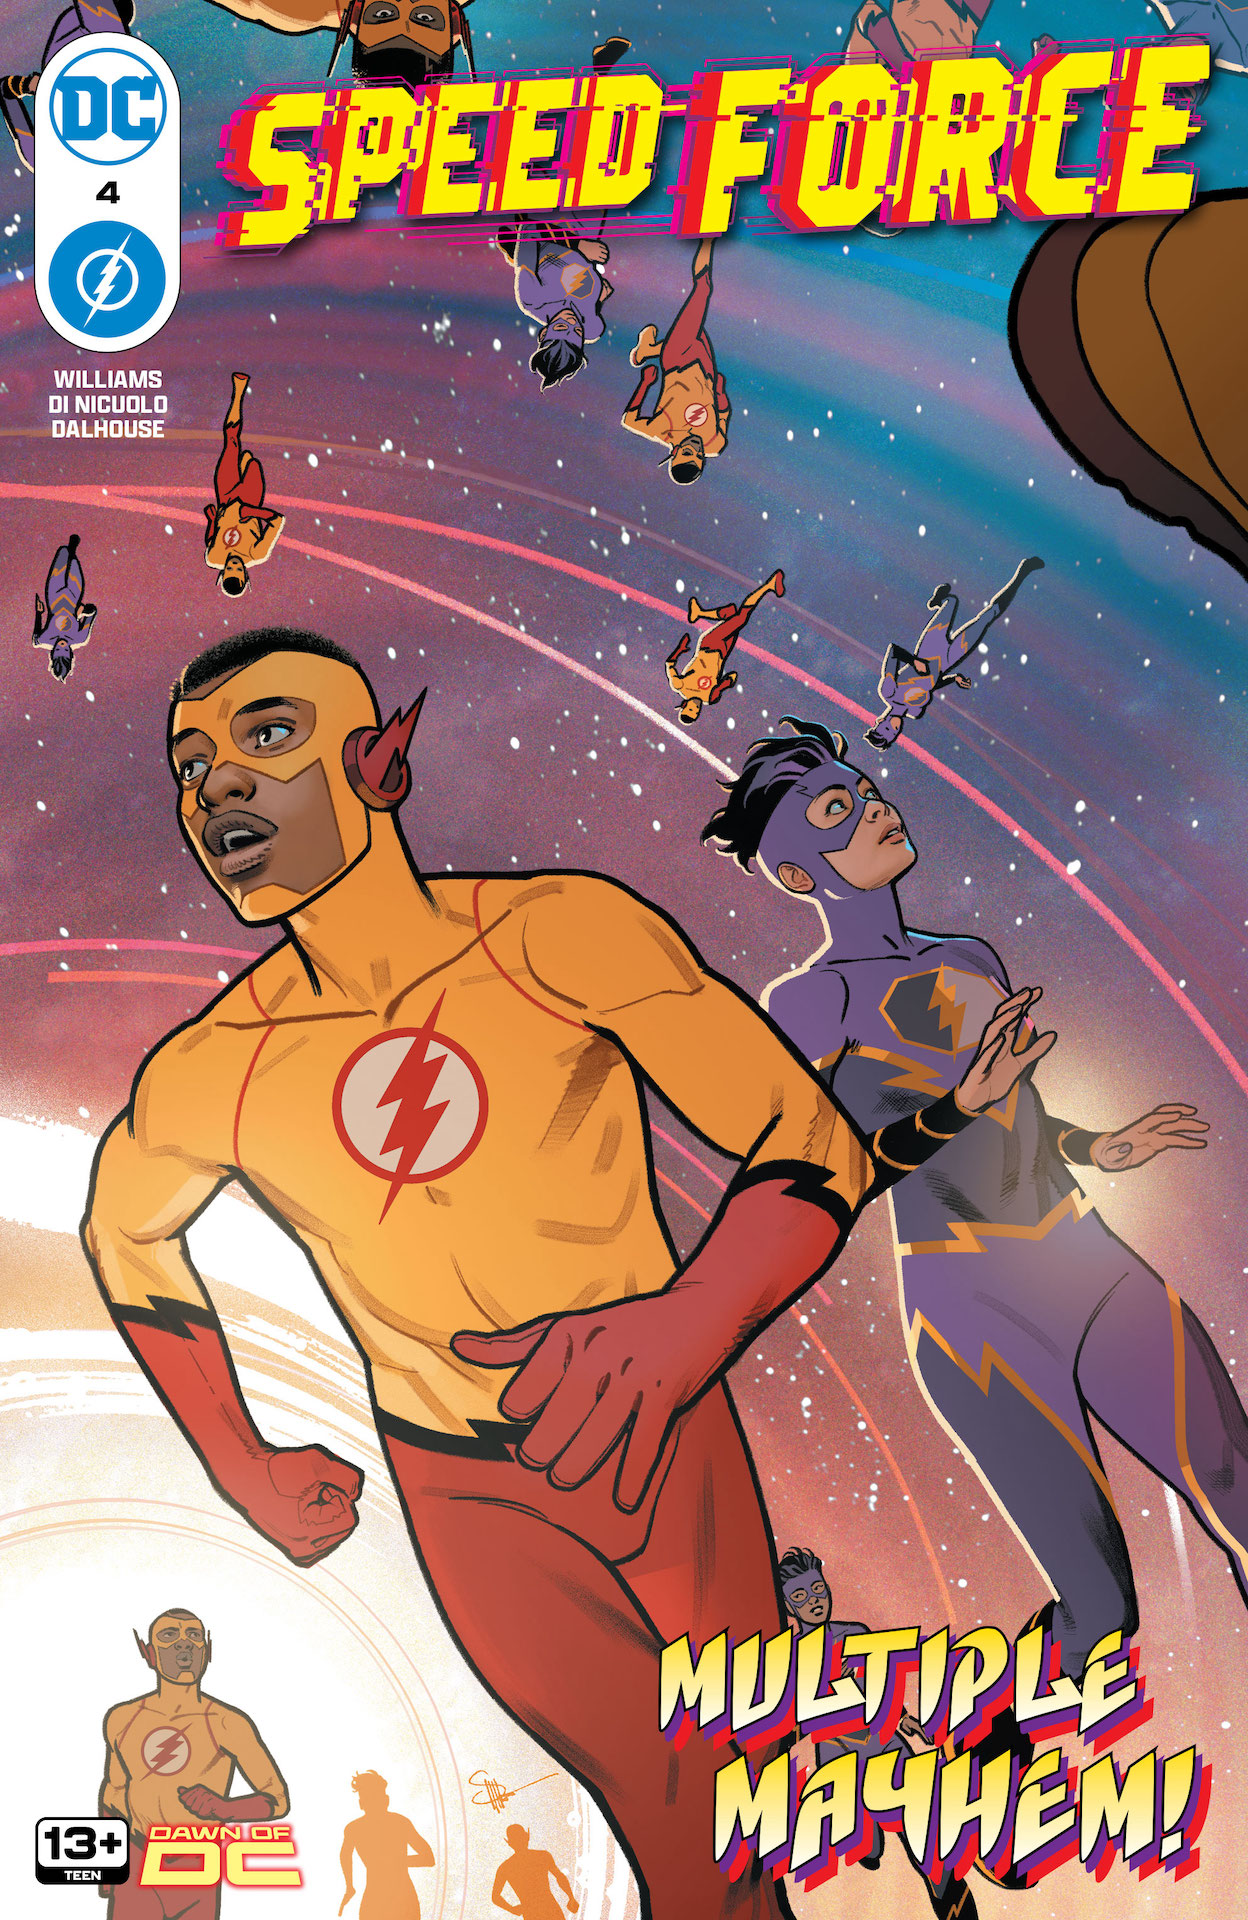 DC Preview: Speed Force #4